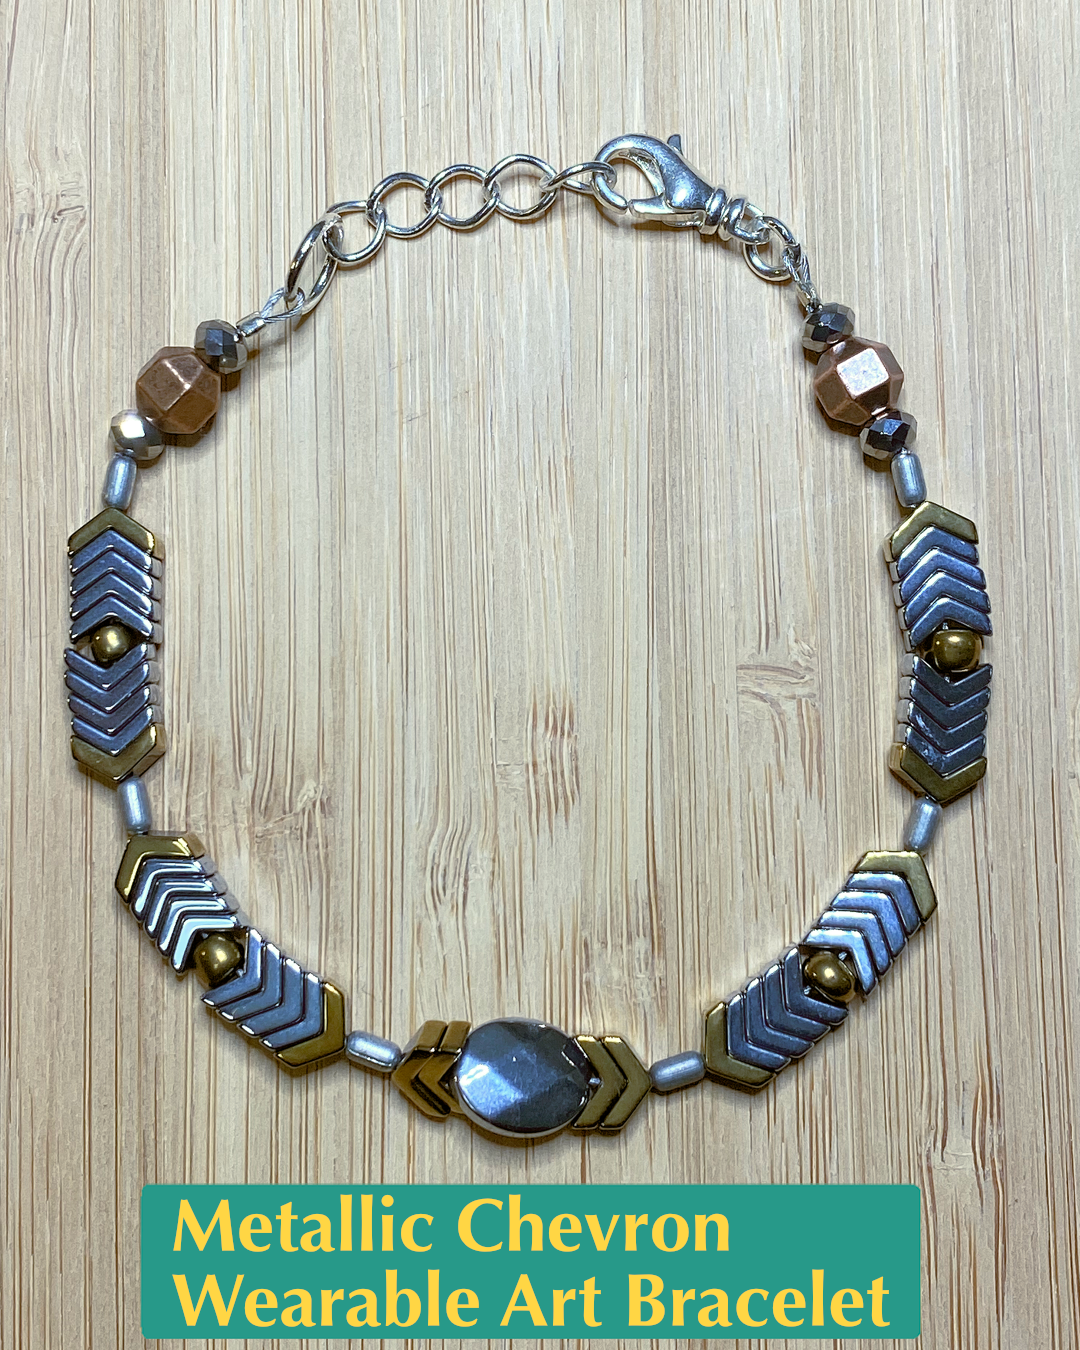 Handmade, wearable art brown, gold, and silver bracelet made of hematite, metal, and salvaged beads